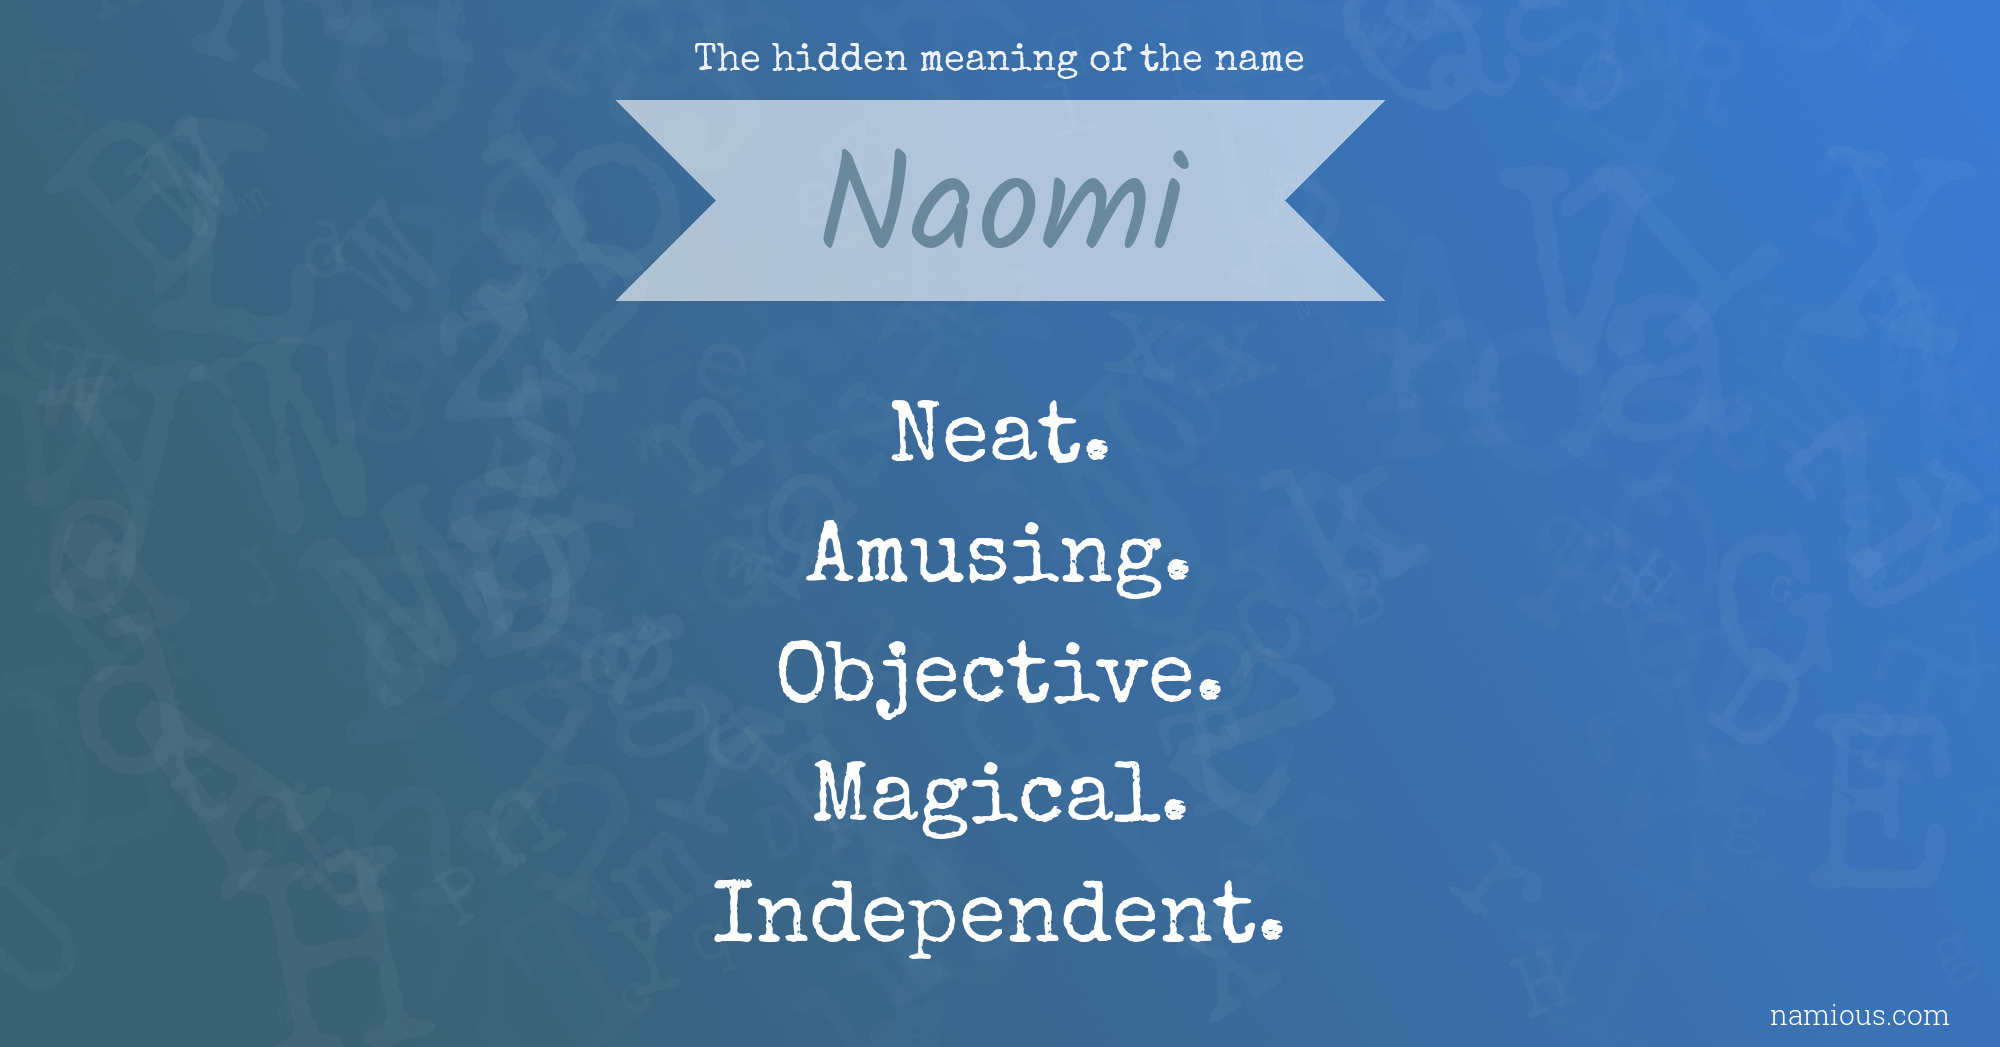 The hidden meaning of the name Naomi